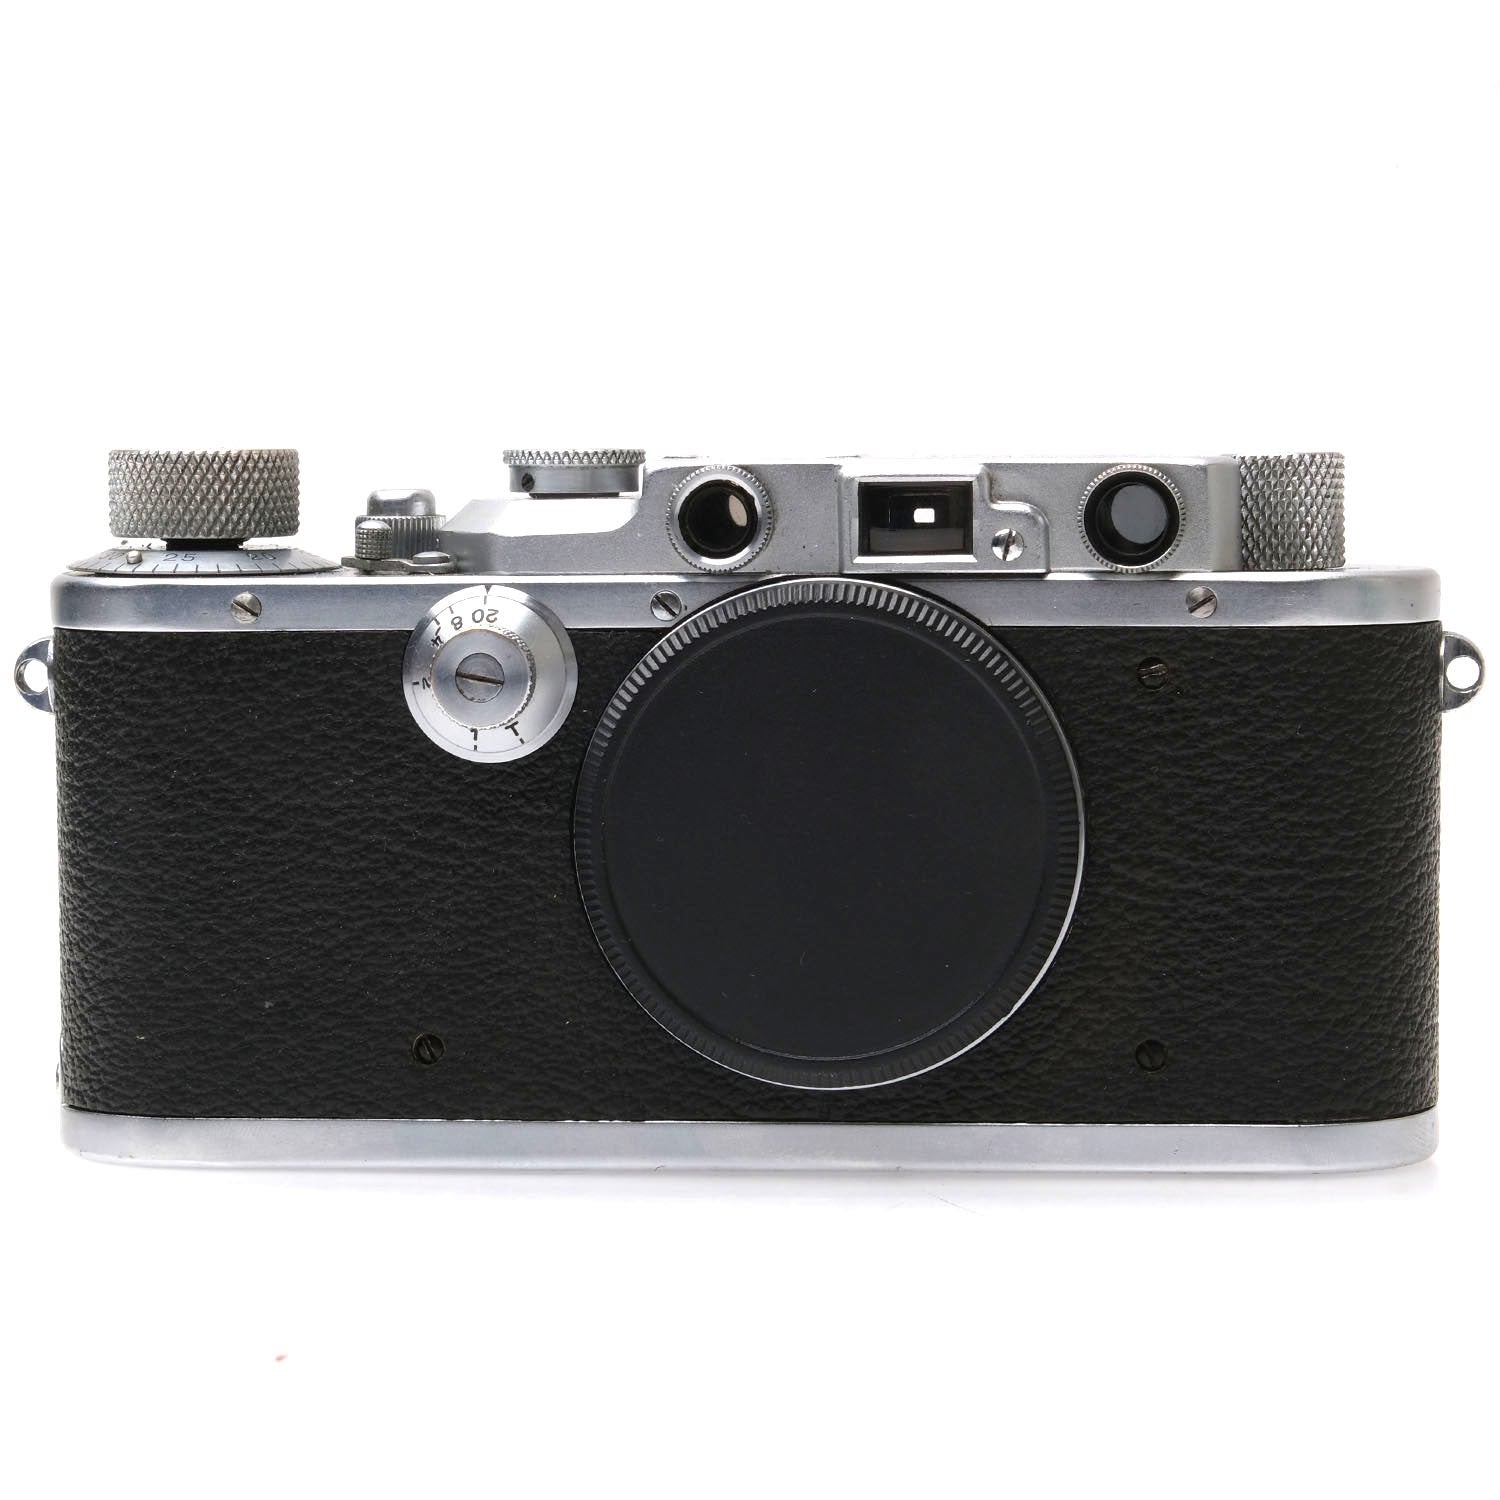 Leica IIIf, Silver, Red Dot OH 162379